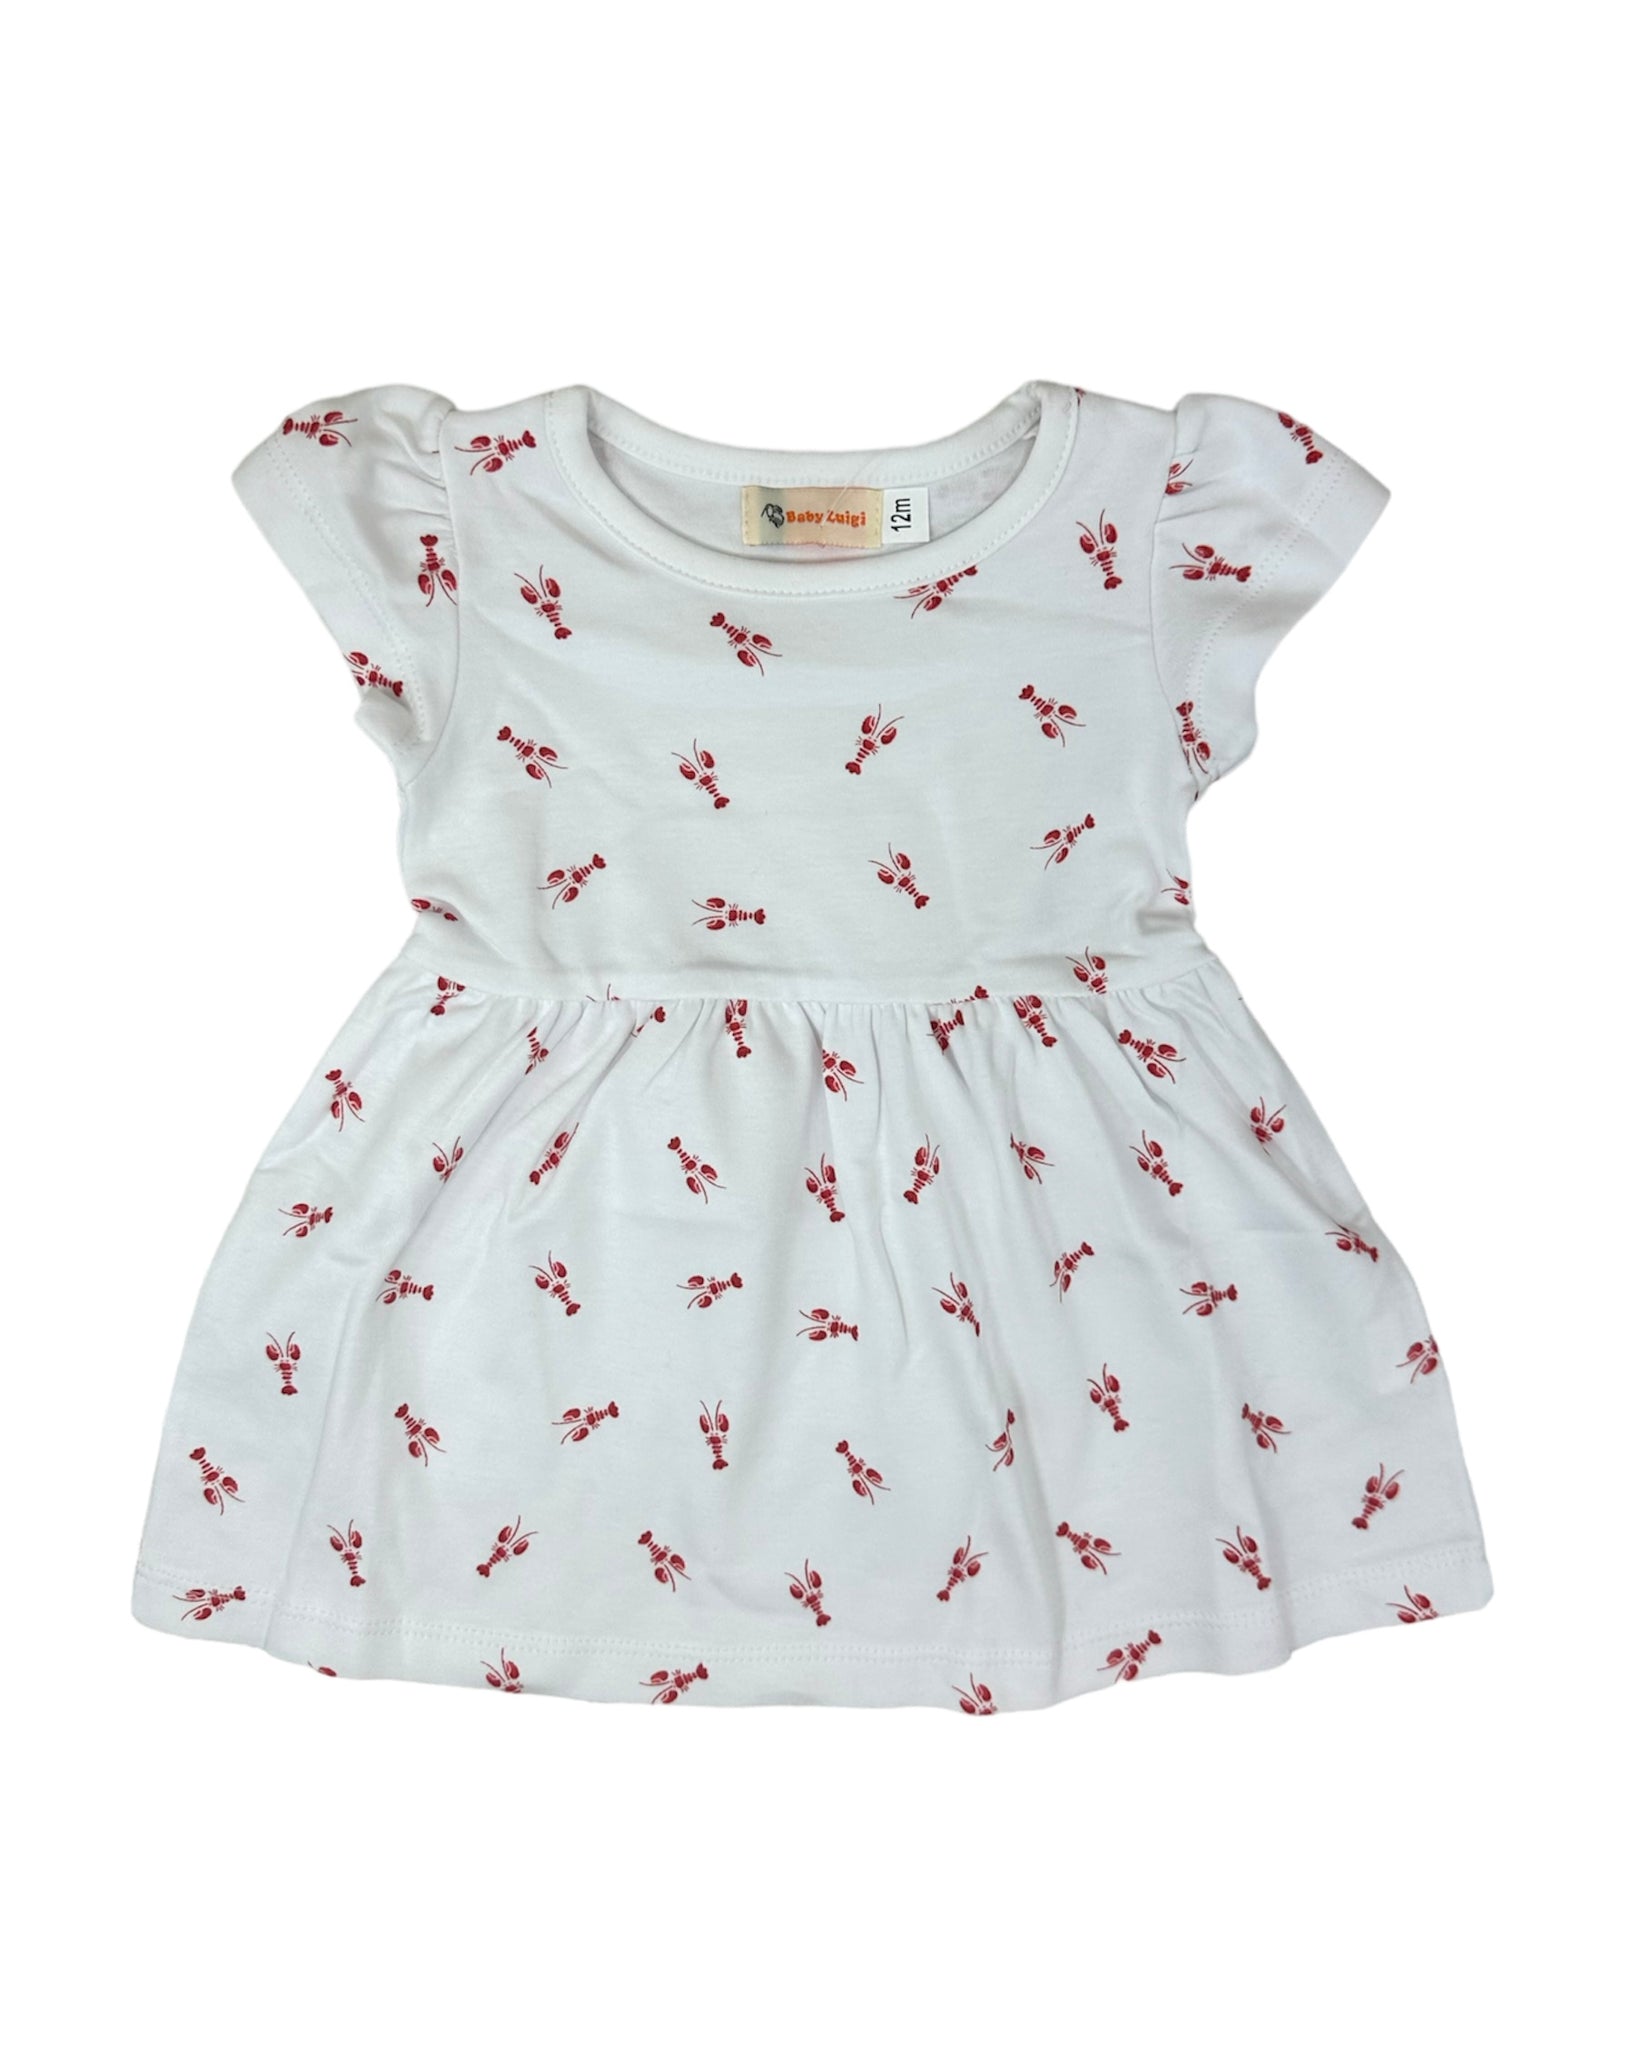 white short sleeve dress with red lobsters all over